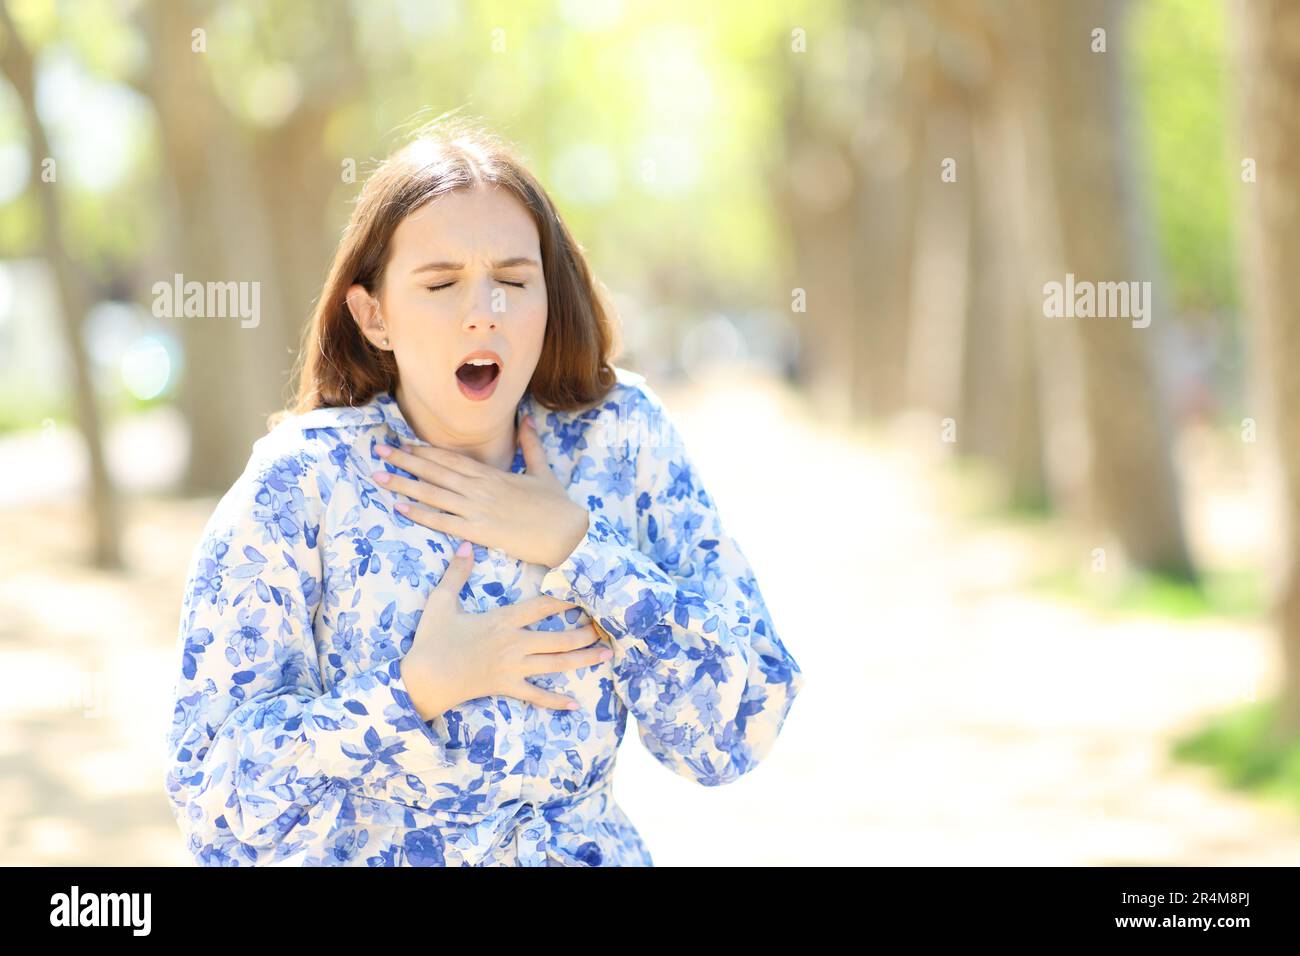 Front view portrait of a stressed woman choking in a park Stock Photo